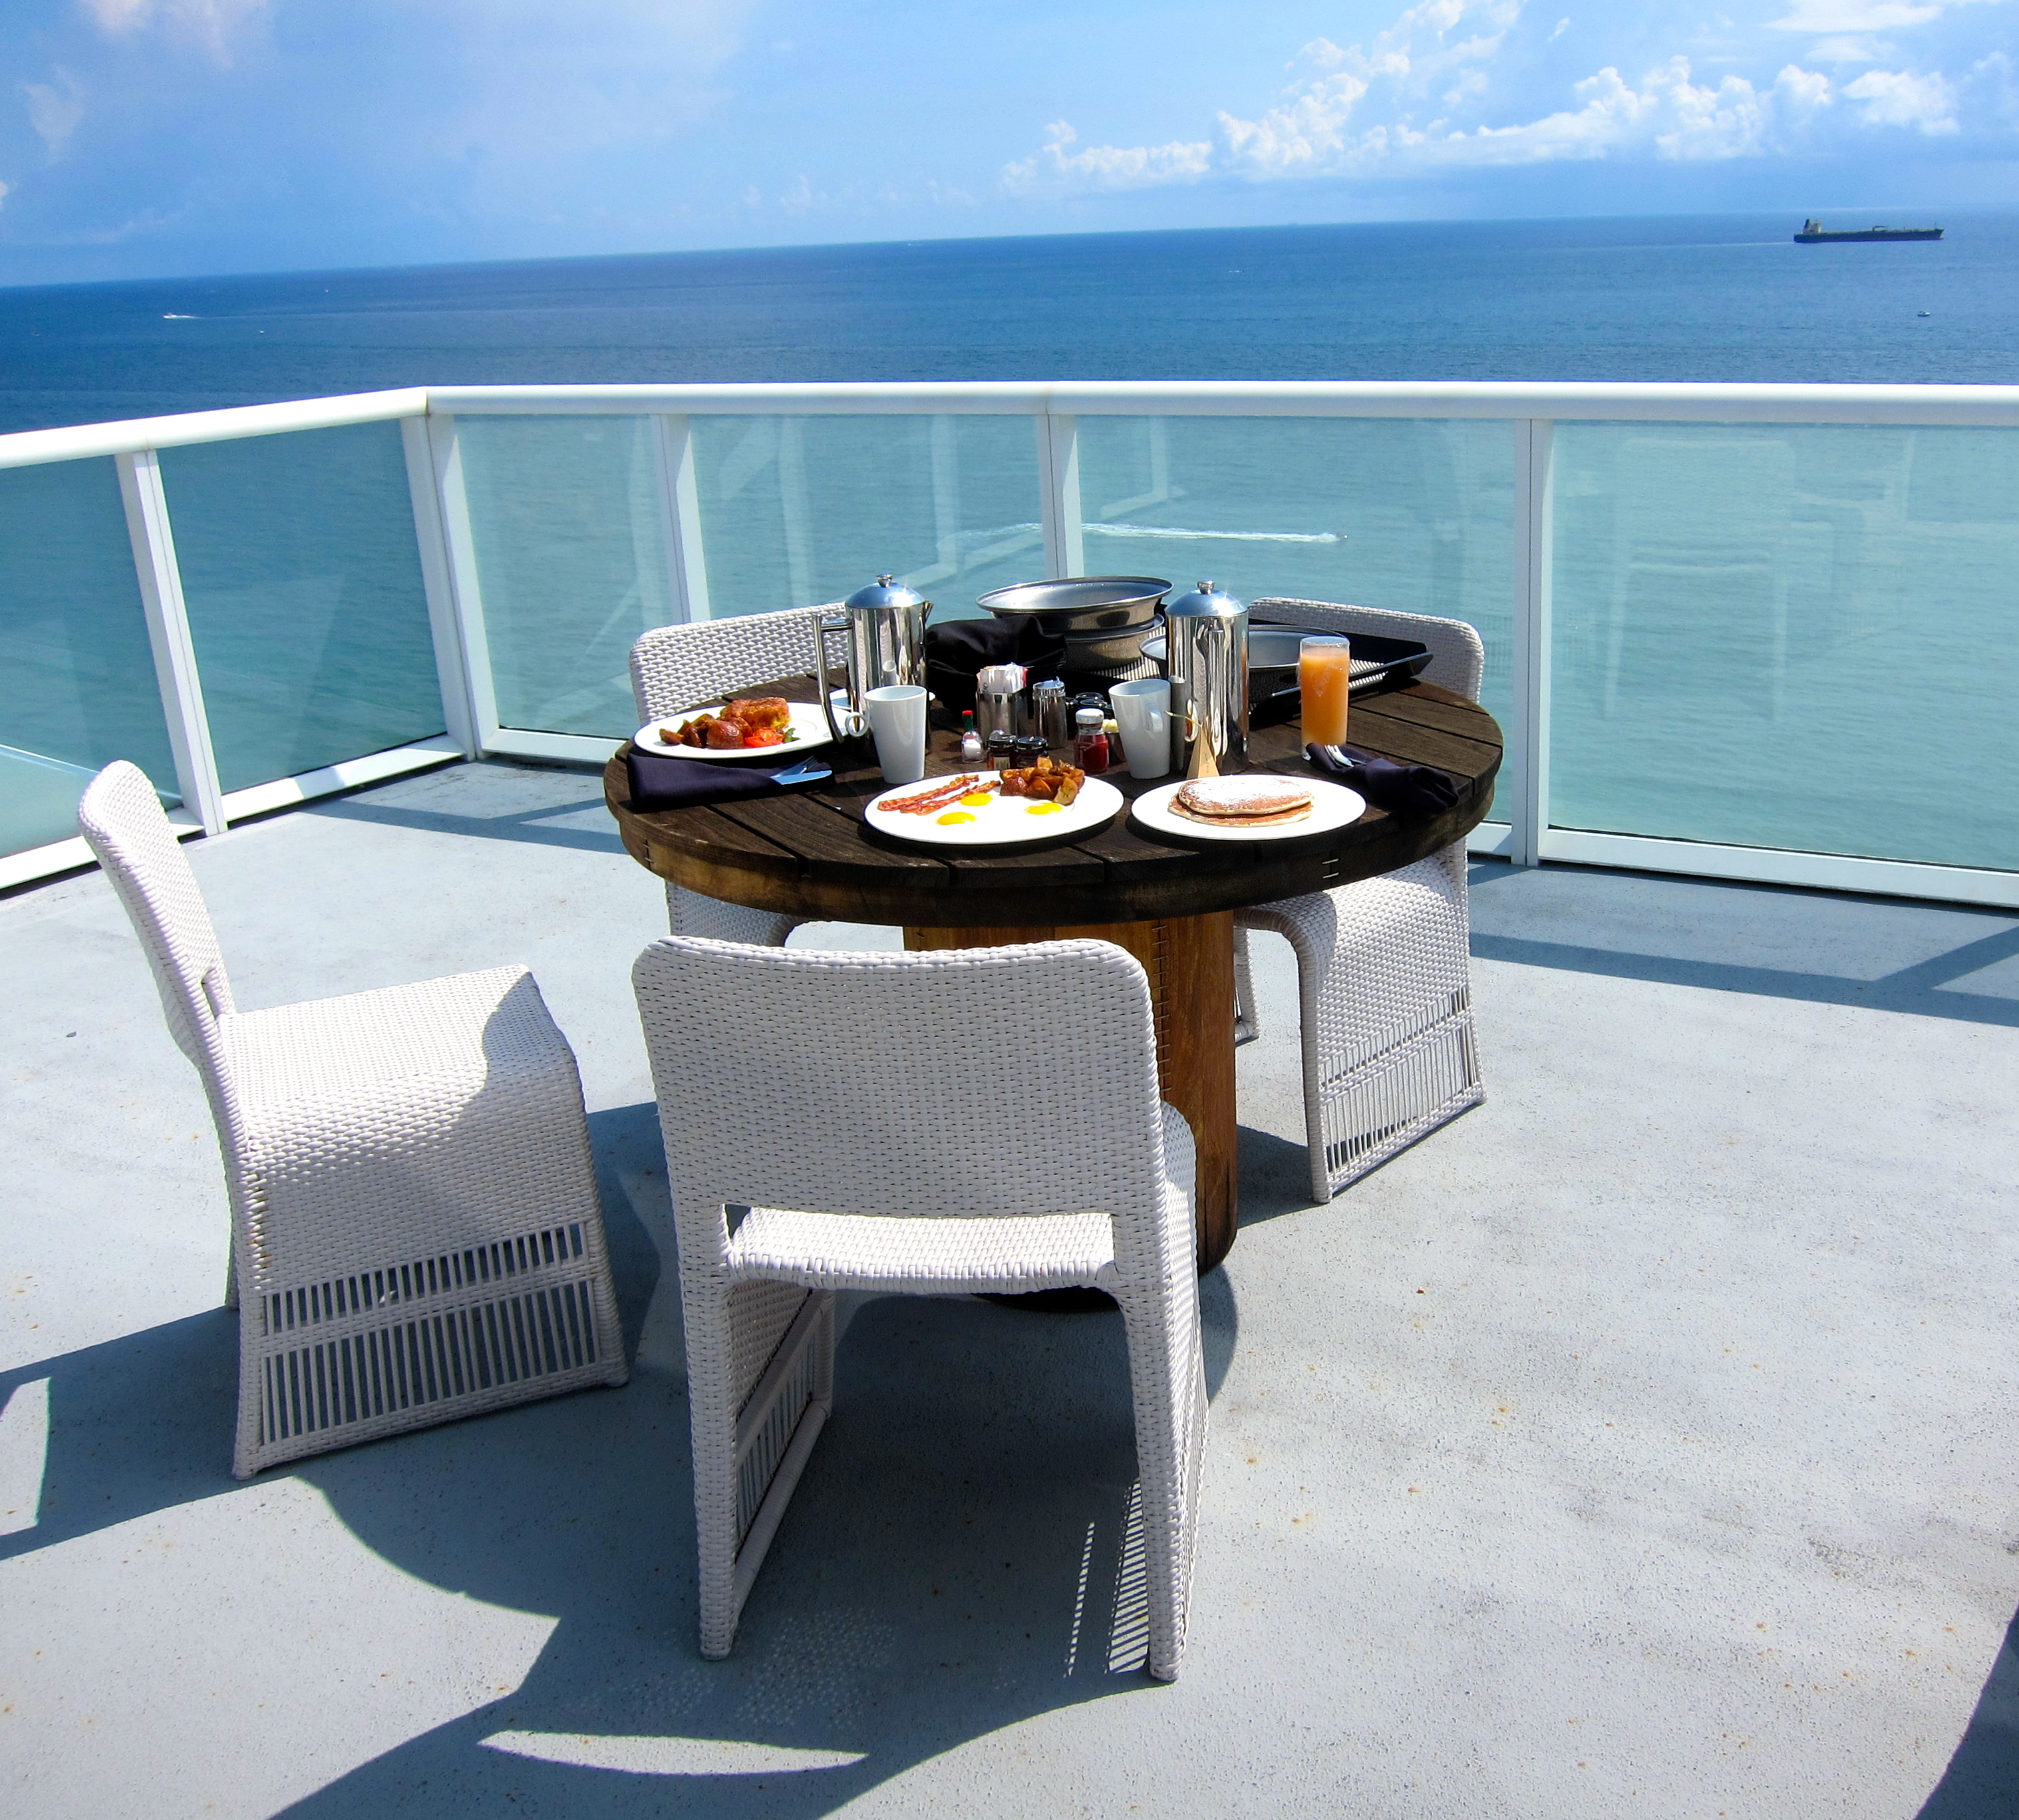 a table with food on it and chairs on a deck overlooking the ocean